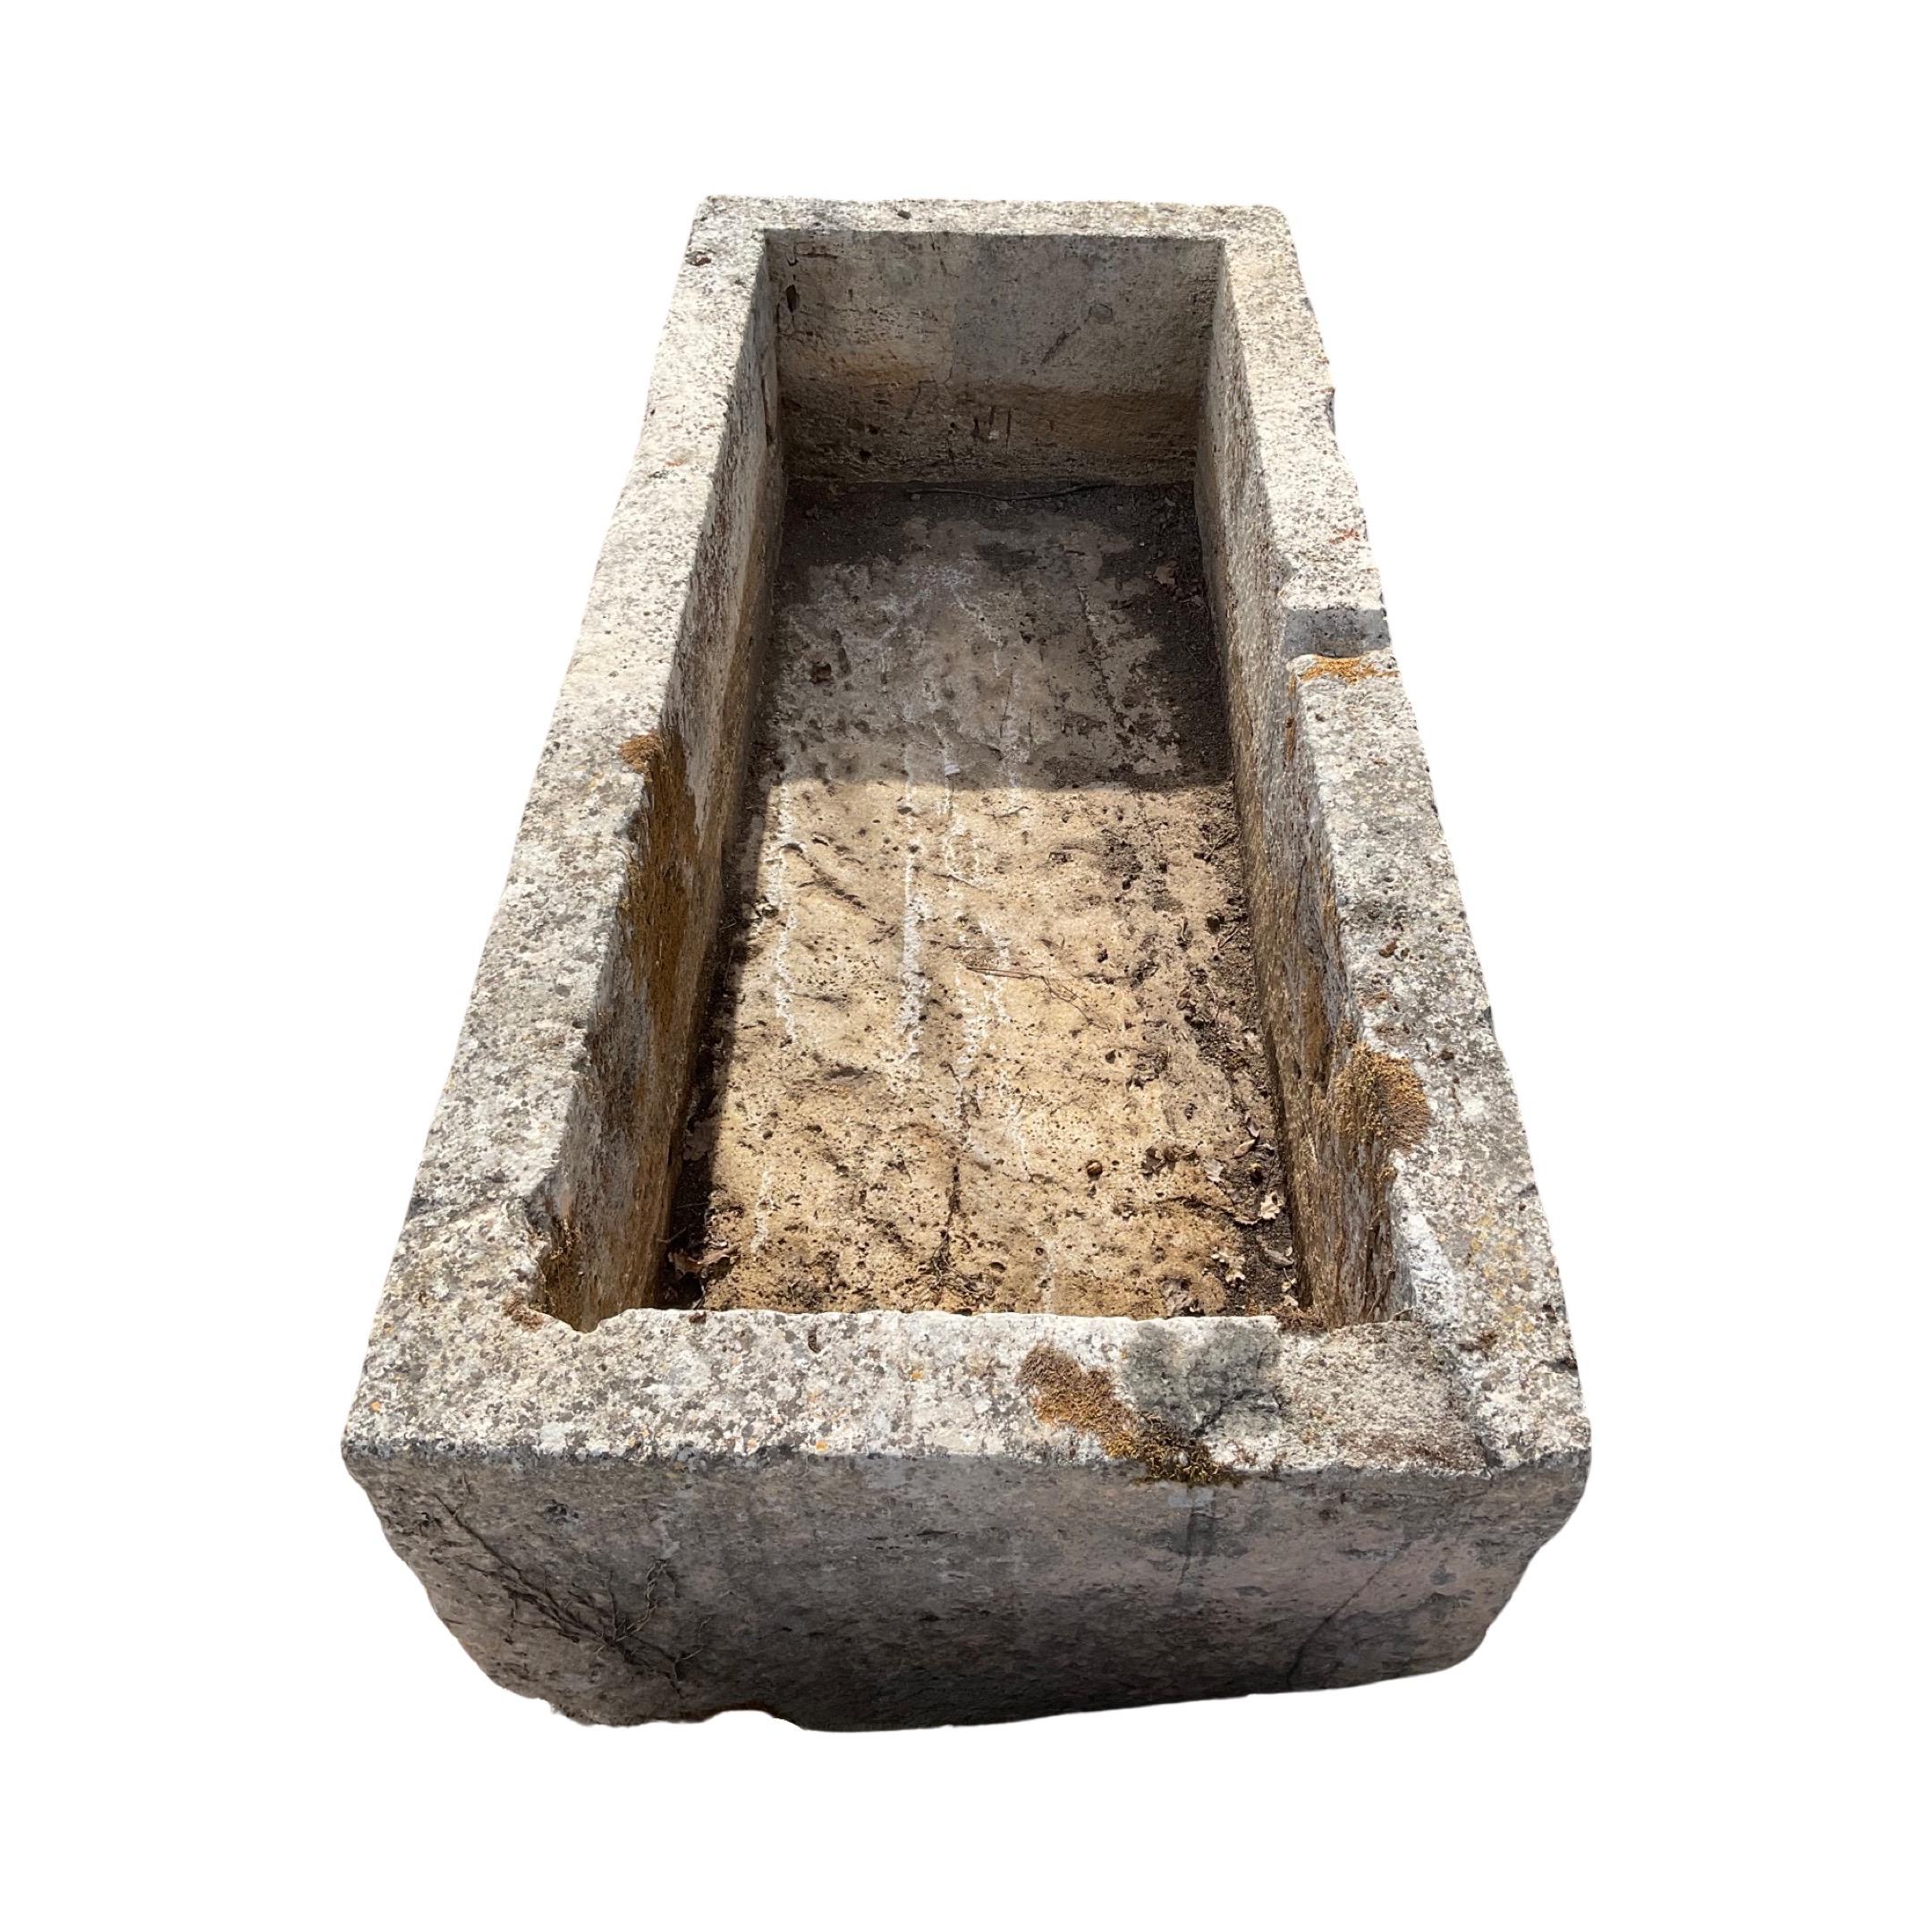 Dating back to the 18th century, this French Limestone Trough is a stunningly authentic antique. Its strong limestone construction ensures its timelessness and durability, making it the ideal piece for adding a classic touch to any outdoor or indoor